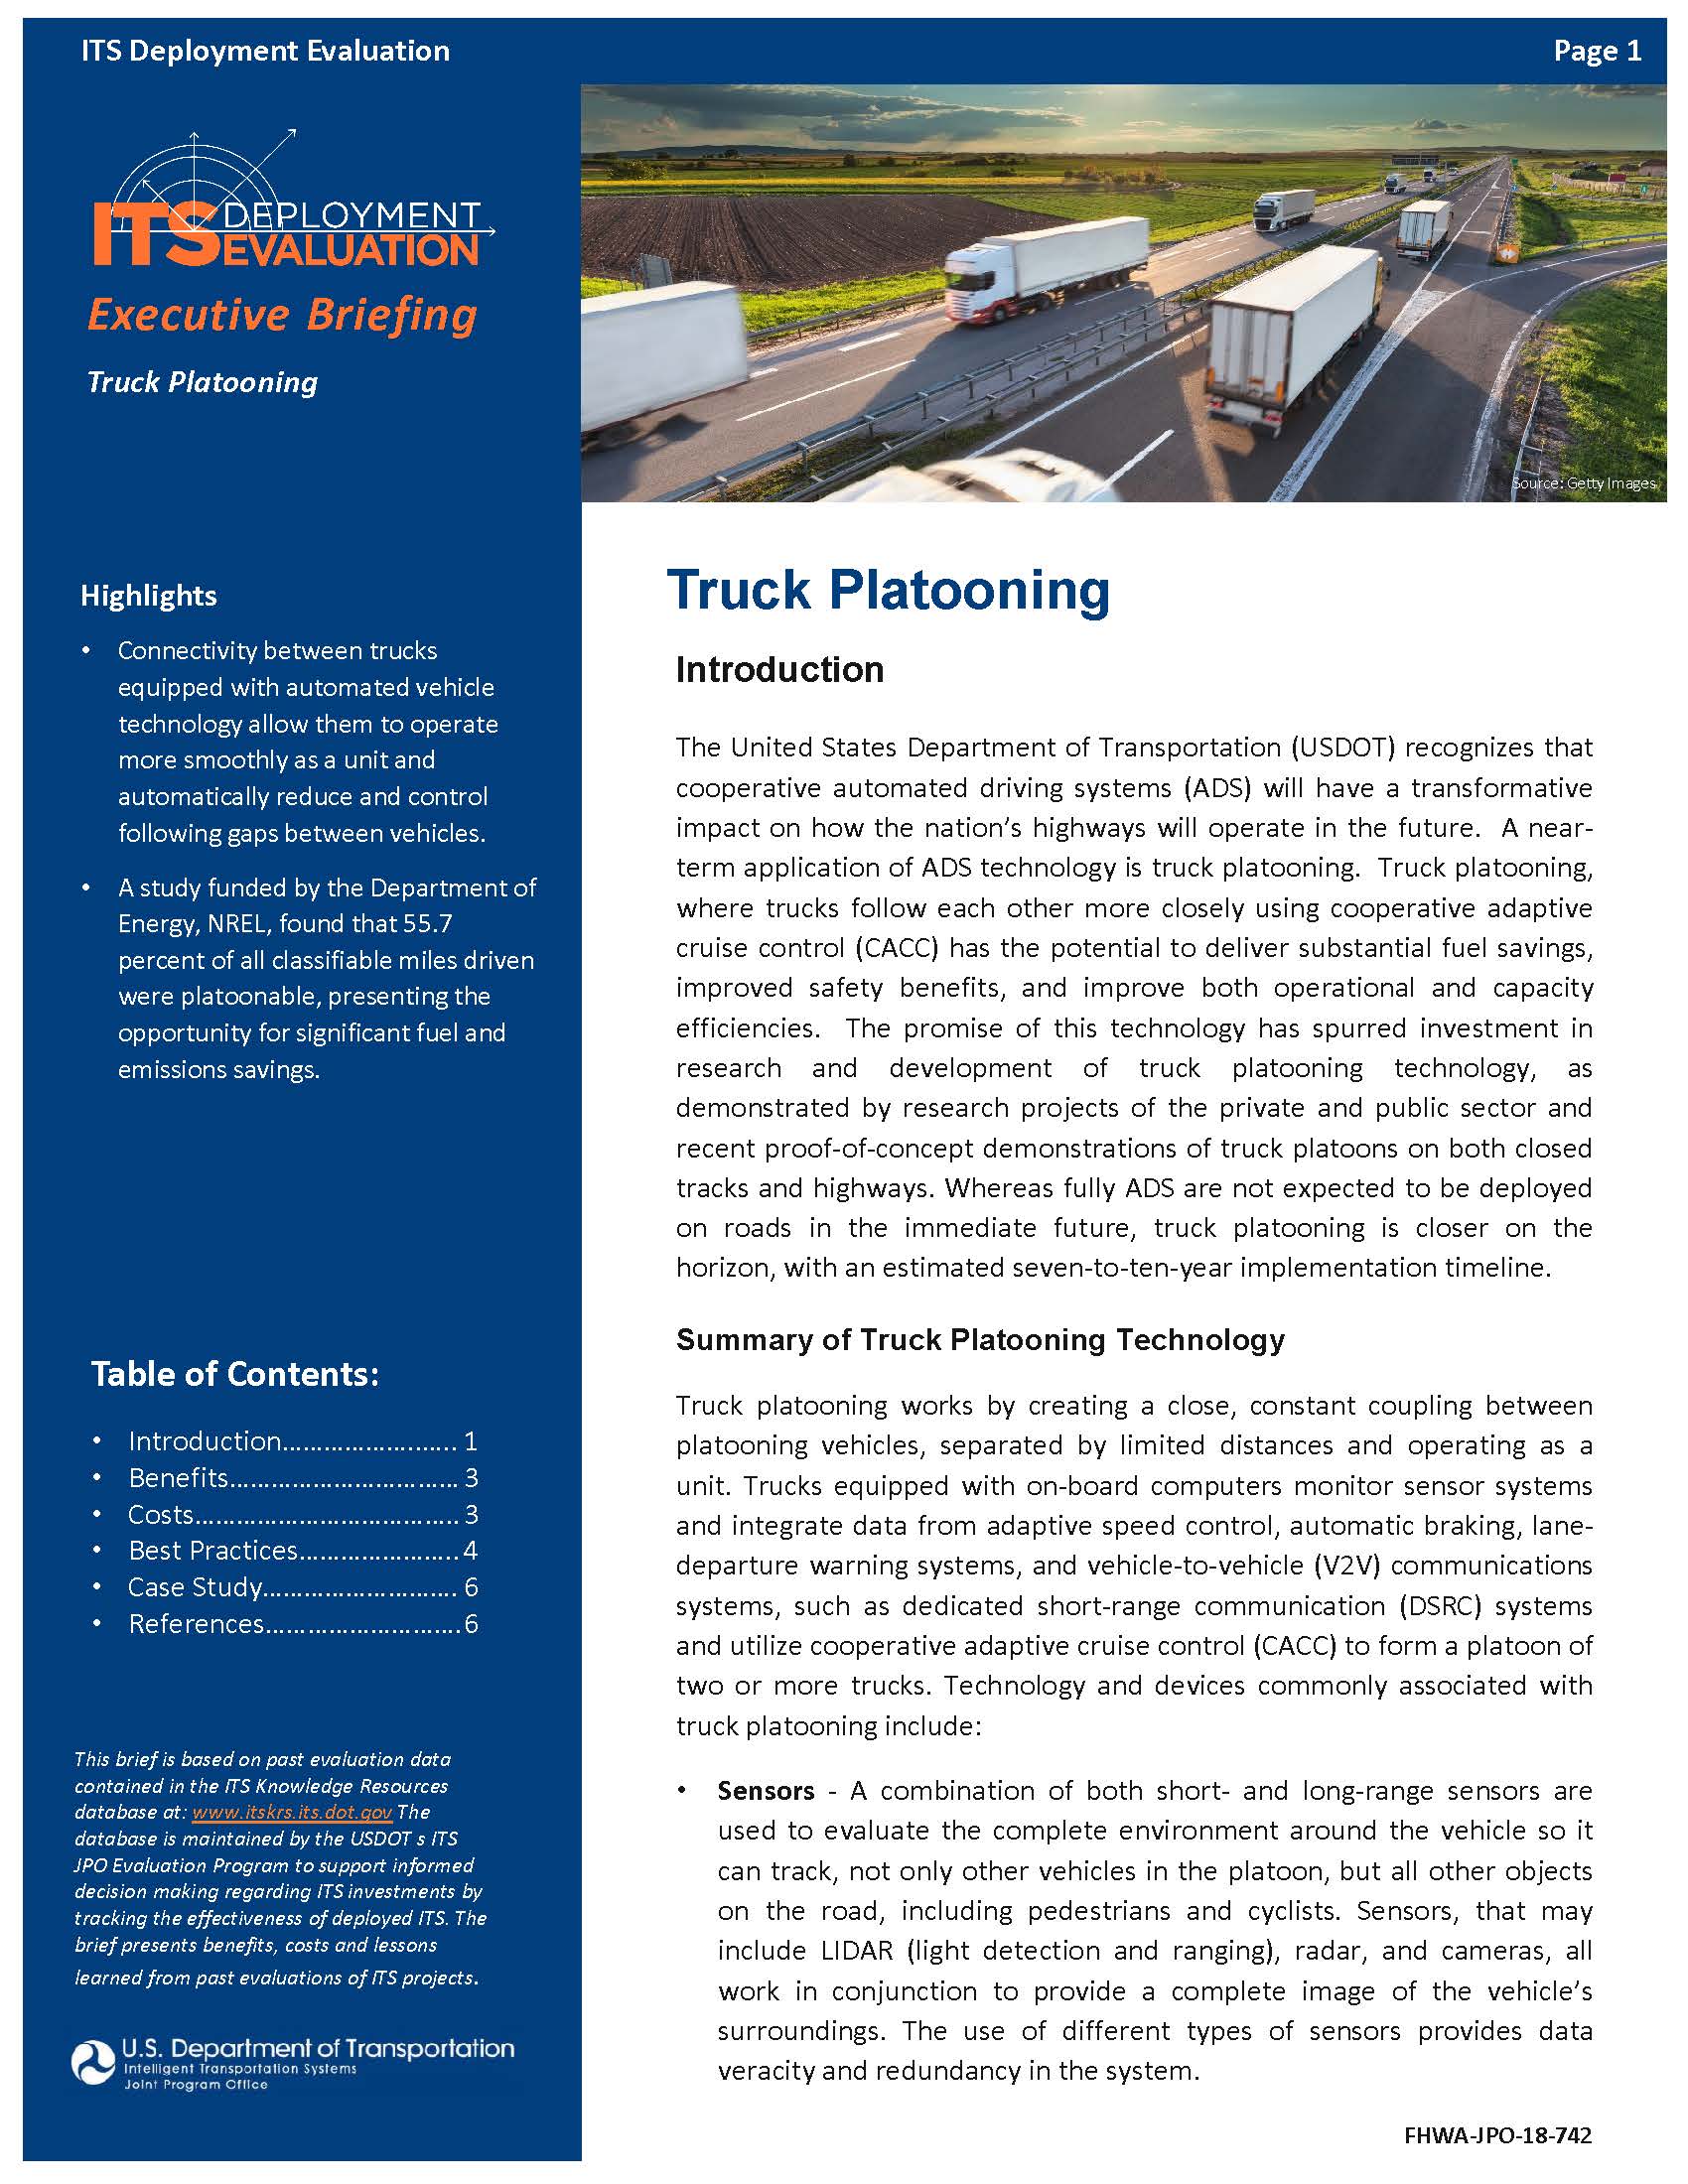 Cover Page of the Truck Platooning Executive Briefing